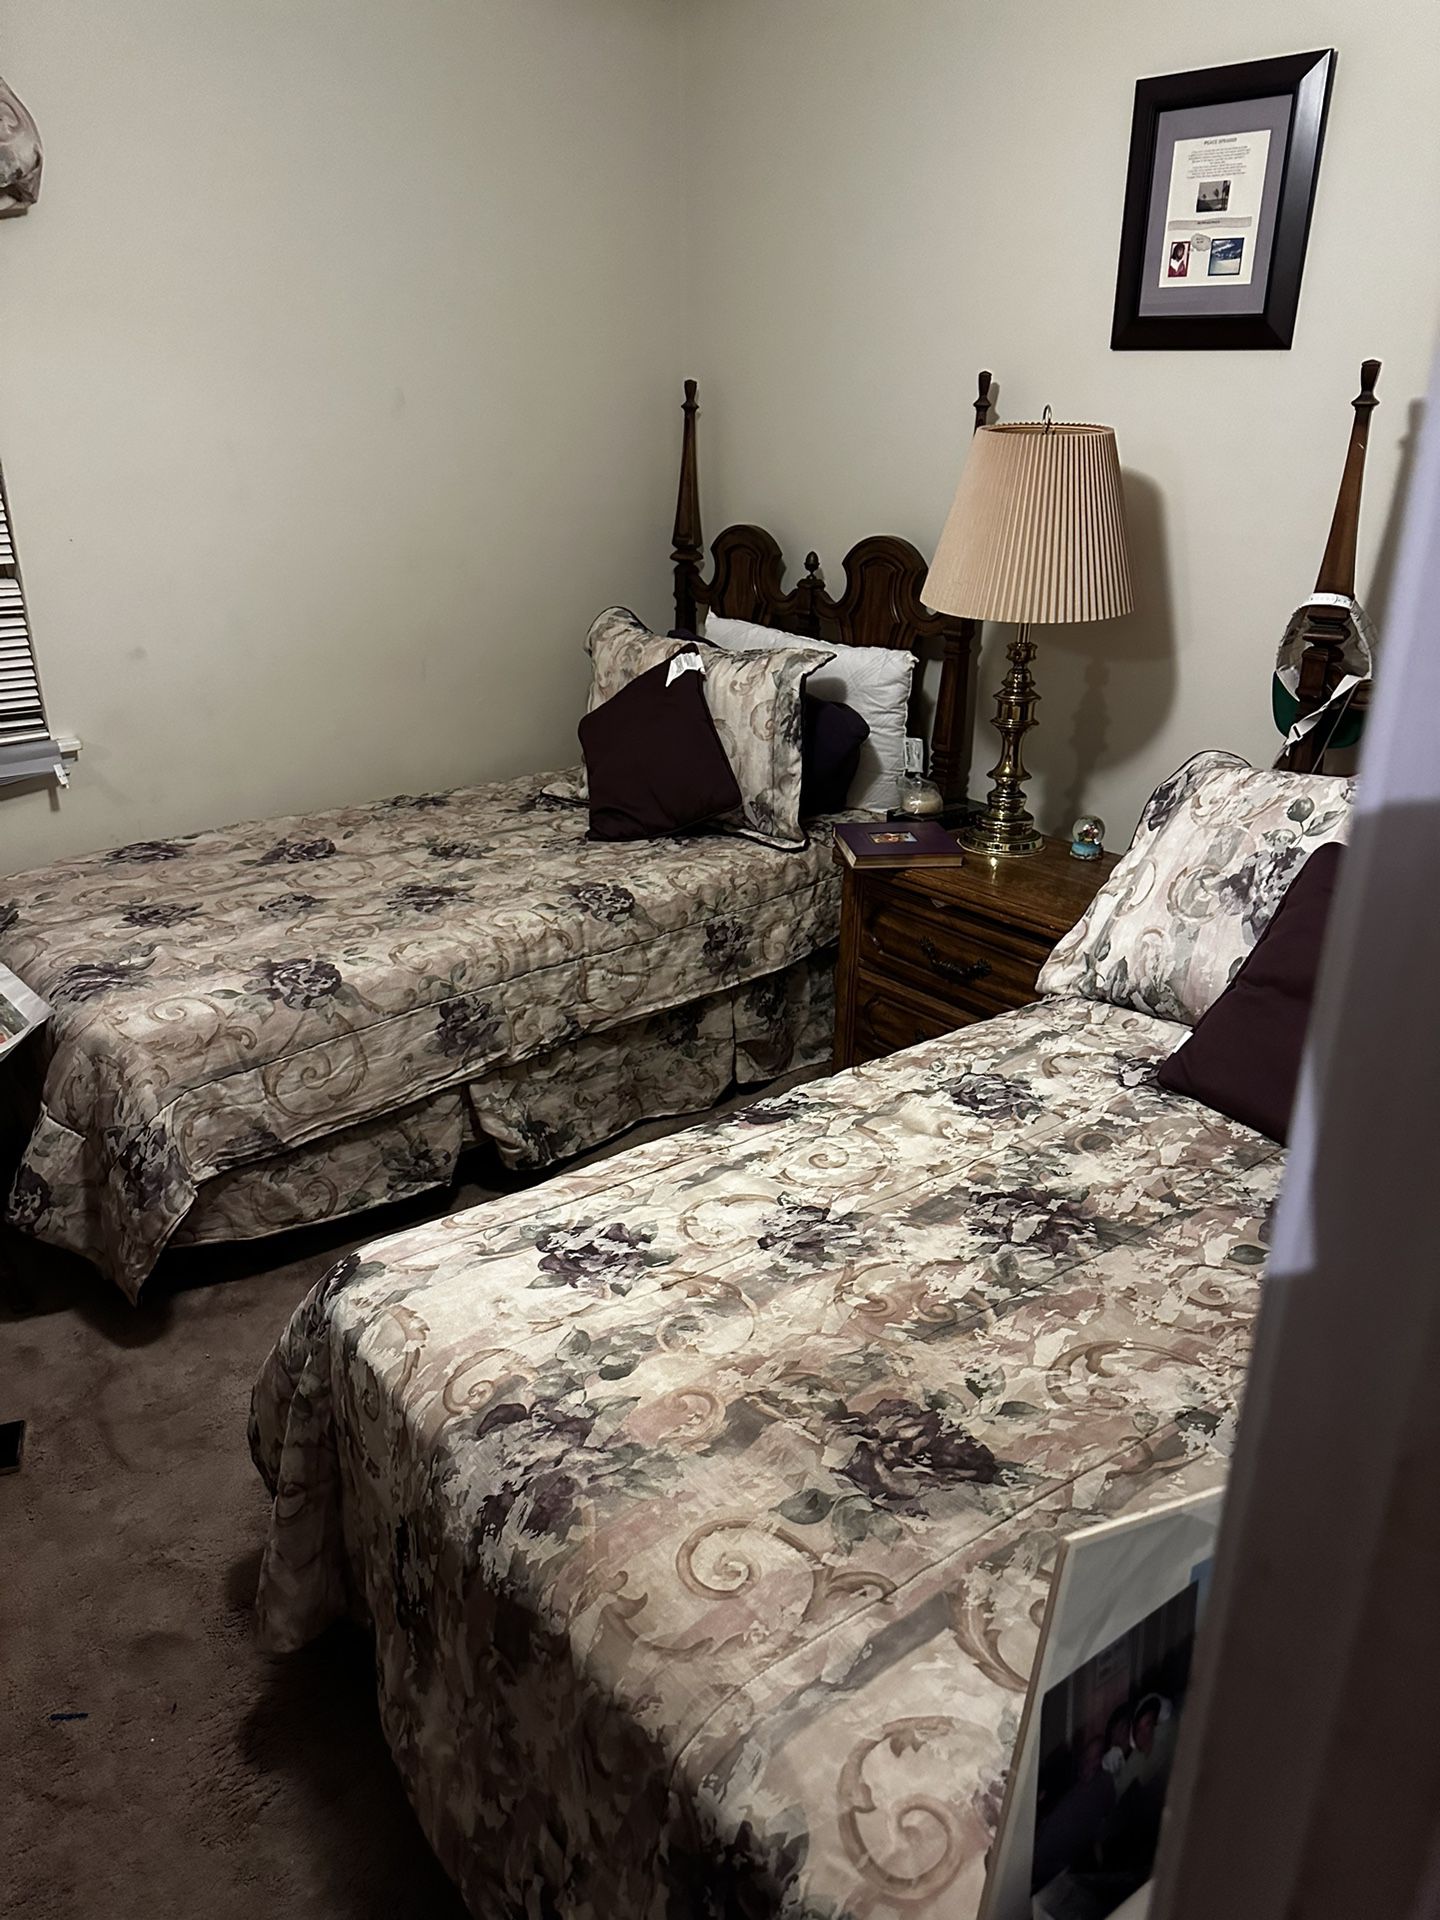 Solid Wood Twin Beds In Excellent Condition!!!! Must Sale Quickly Available 5/20